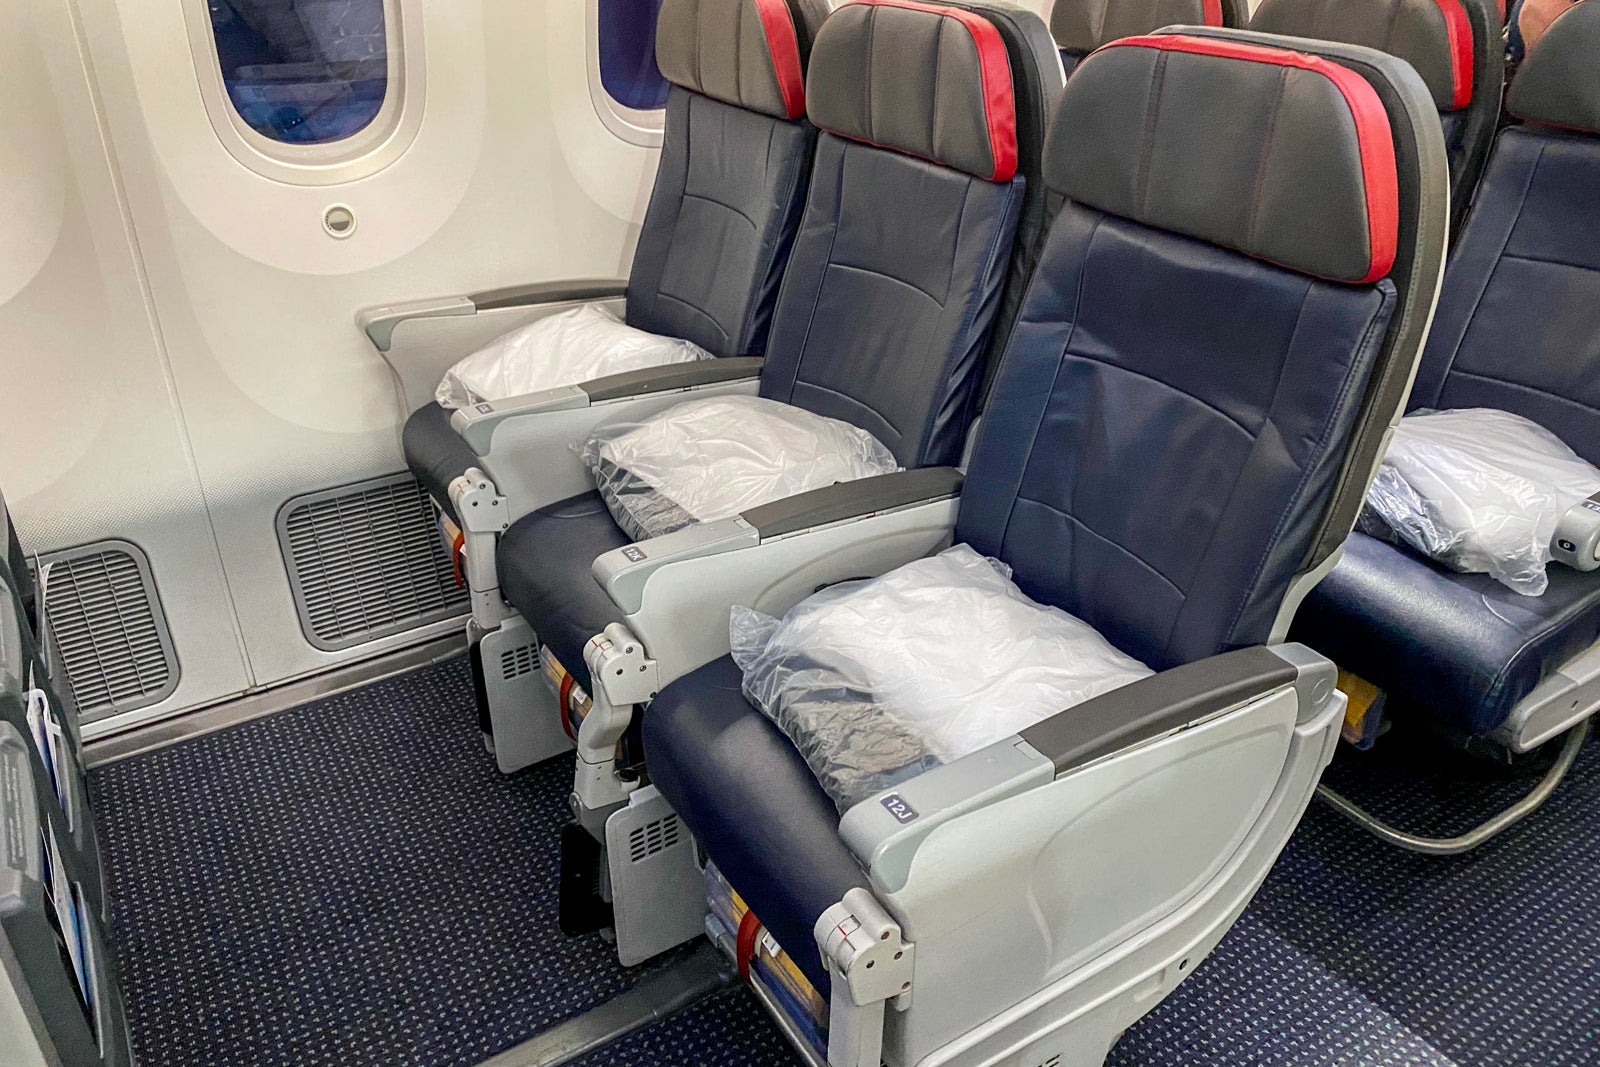 American Airlines economy class on the Boeing 787-9 Dreamliner